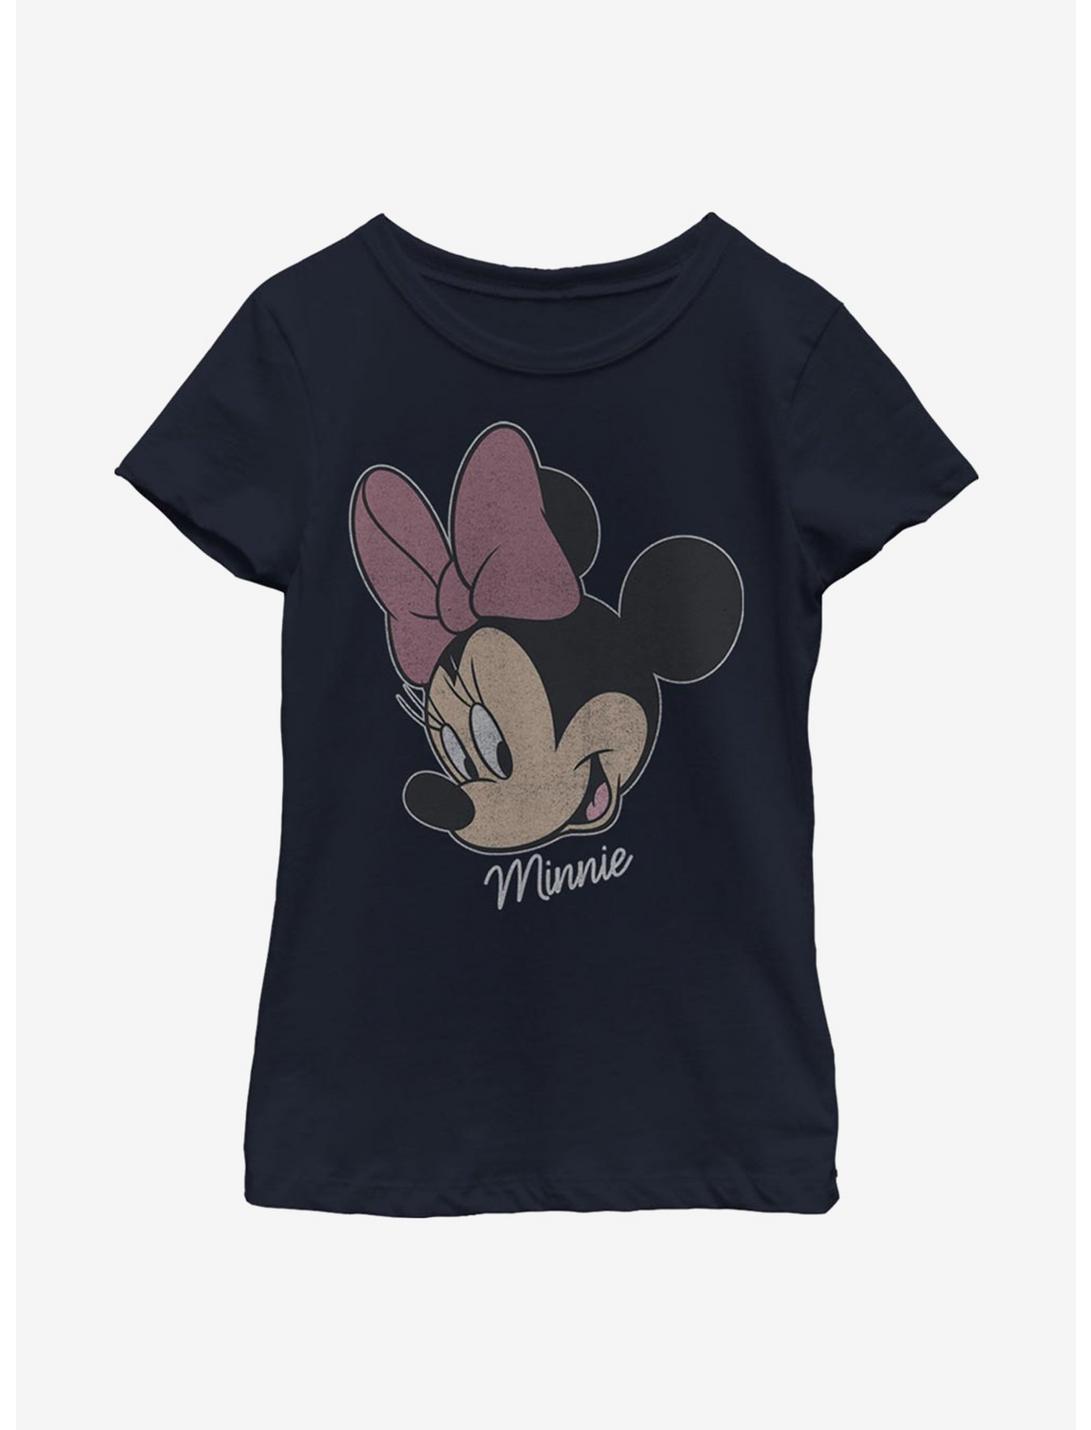 Disney Minnie Mouse Big Face Distressed Youth Girls T-Shirt, NAVY, hi-res